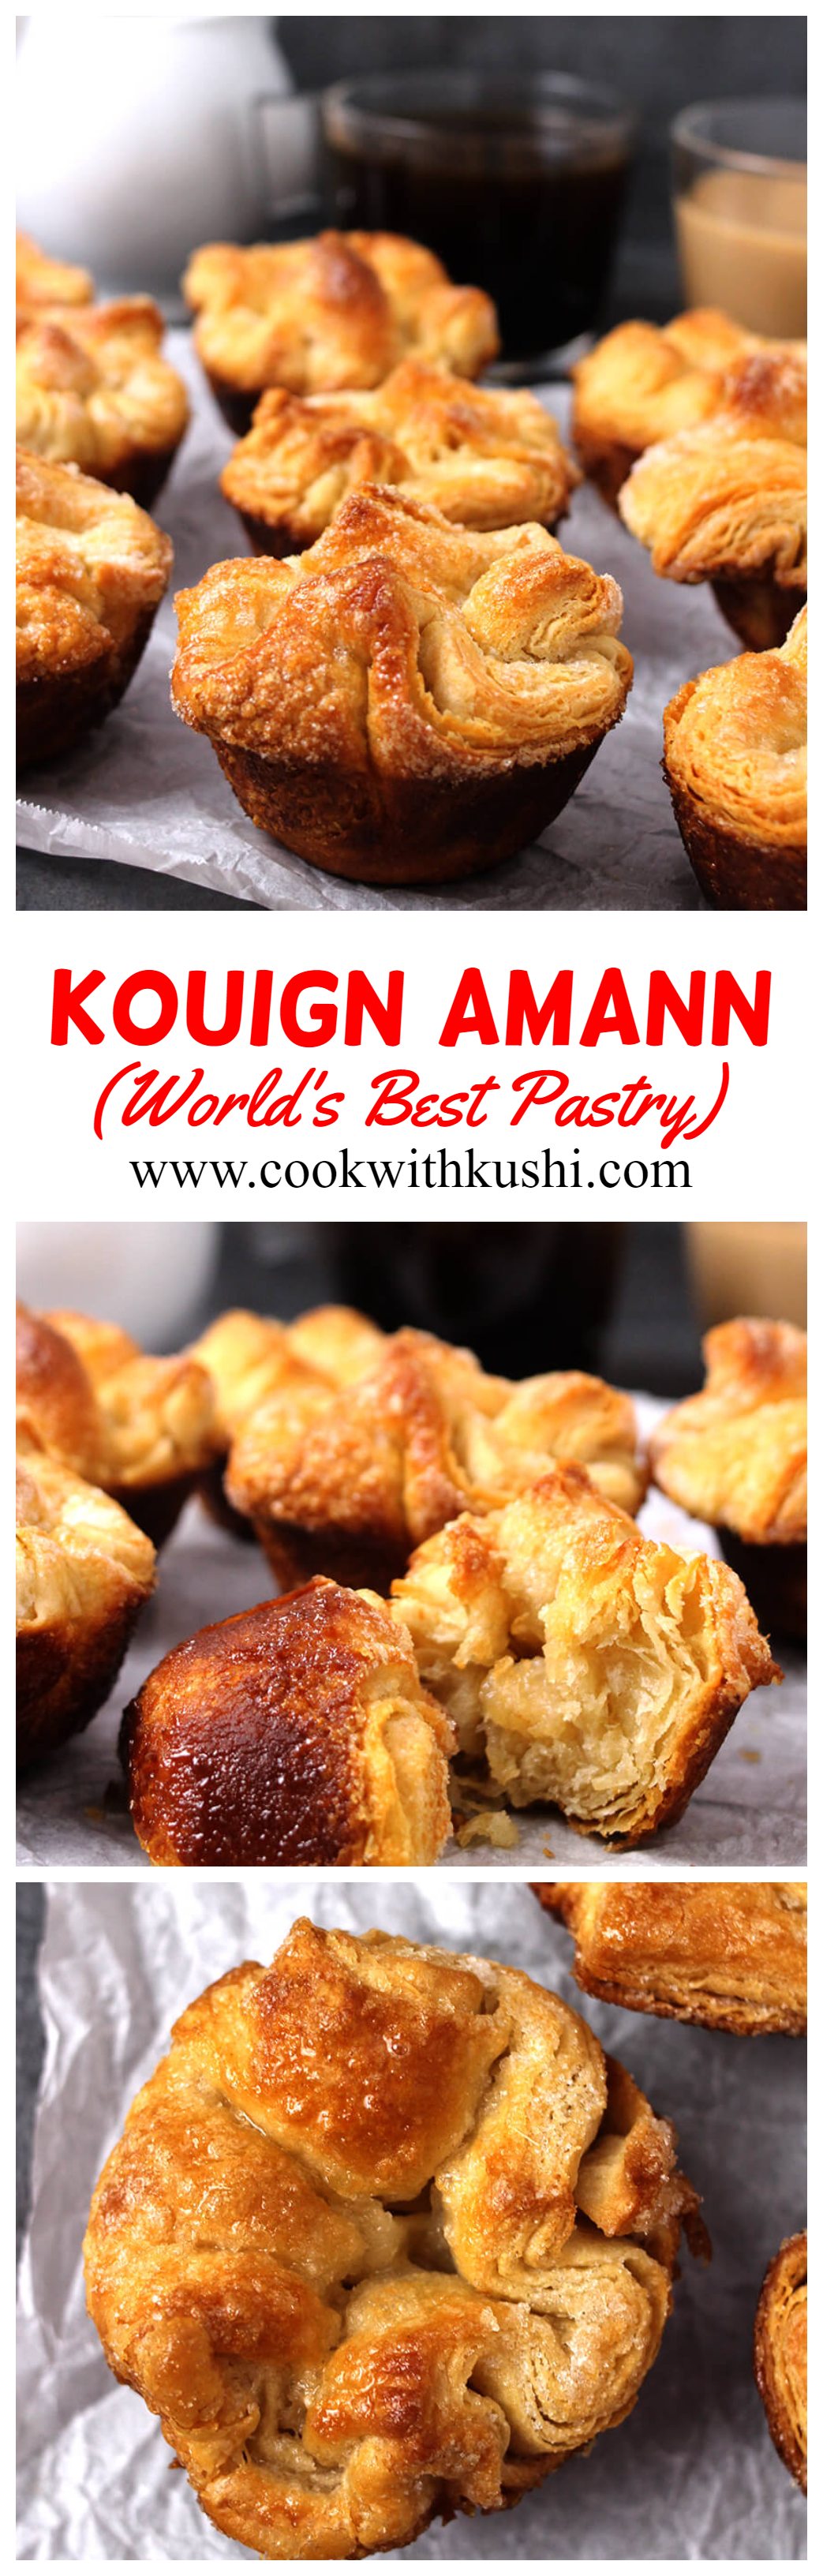 Kouign Amann Breton cake is a flaky and crunchy treat with caramelized outer crust, and sweet, salty & buttery goodness in every single bite. #Kouign Amann #Worldsbestpastry #SavoryBreakfastRecipes #Laminateddoughrecipe #Croissants #FrenchPastry #CarnivalFood #PuffPastry #HomemadePastries #FrenchPastries #breakfastpastry